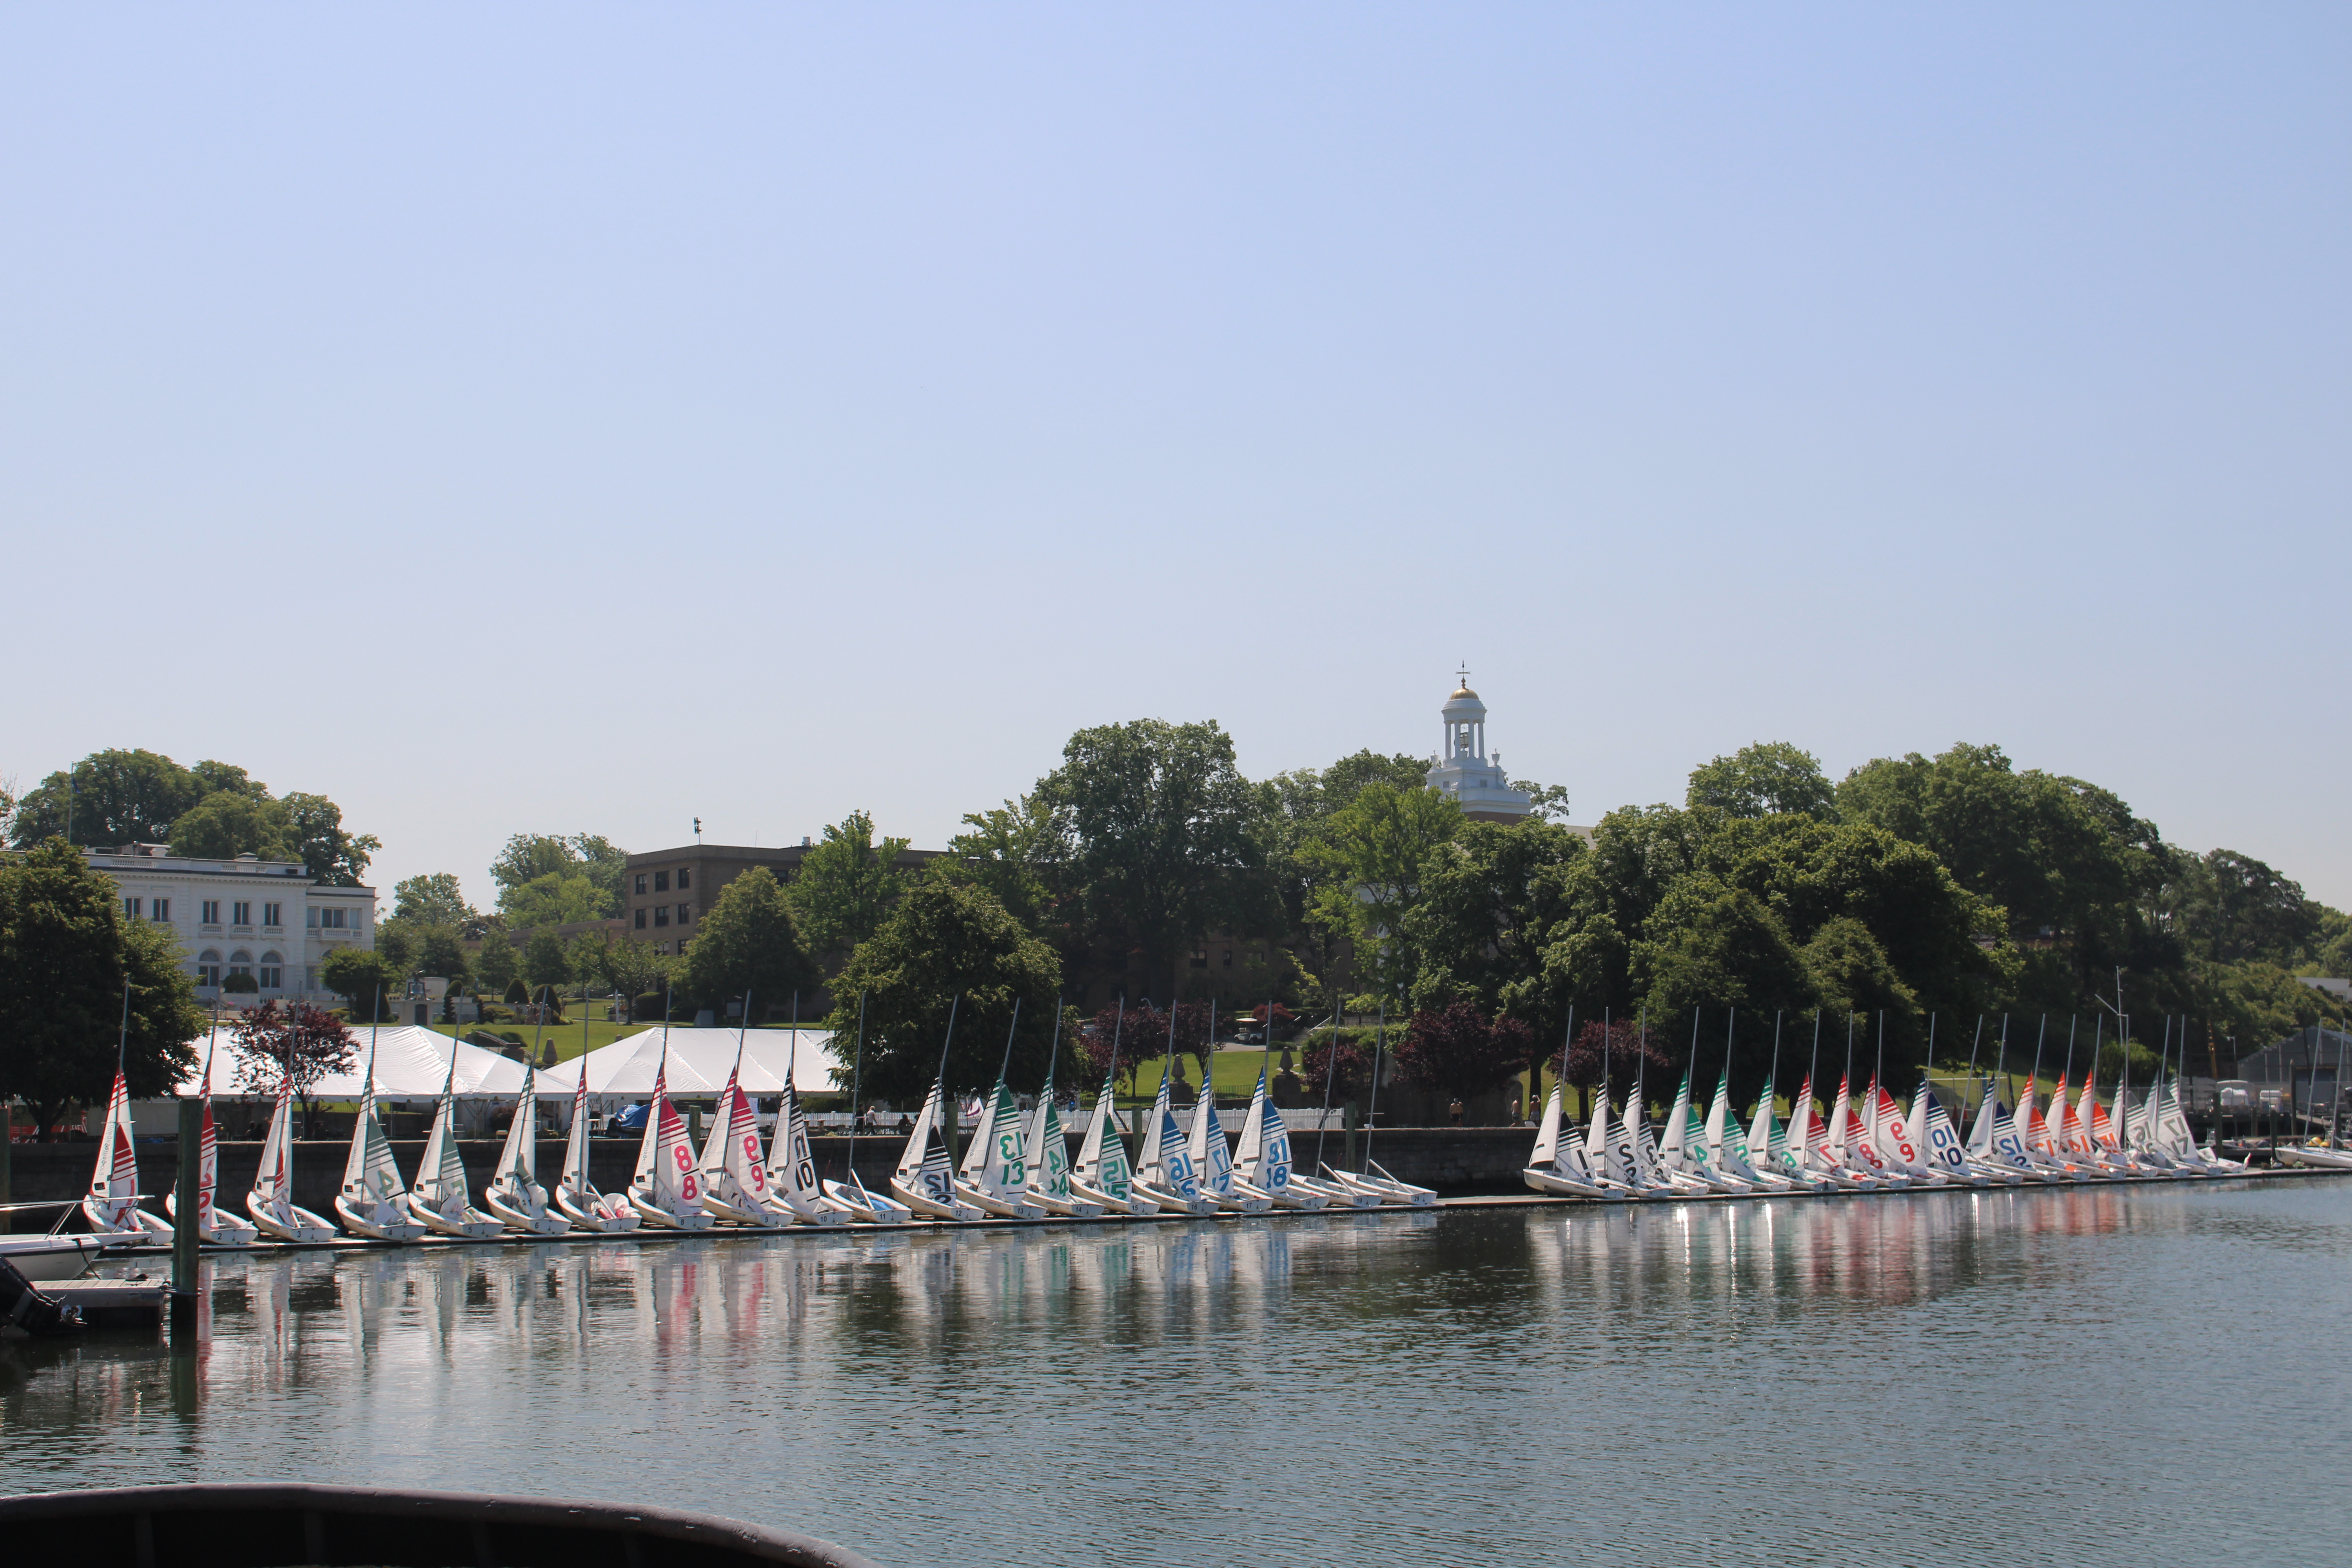 Boats lined up with Wiley Hall in the background